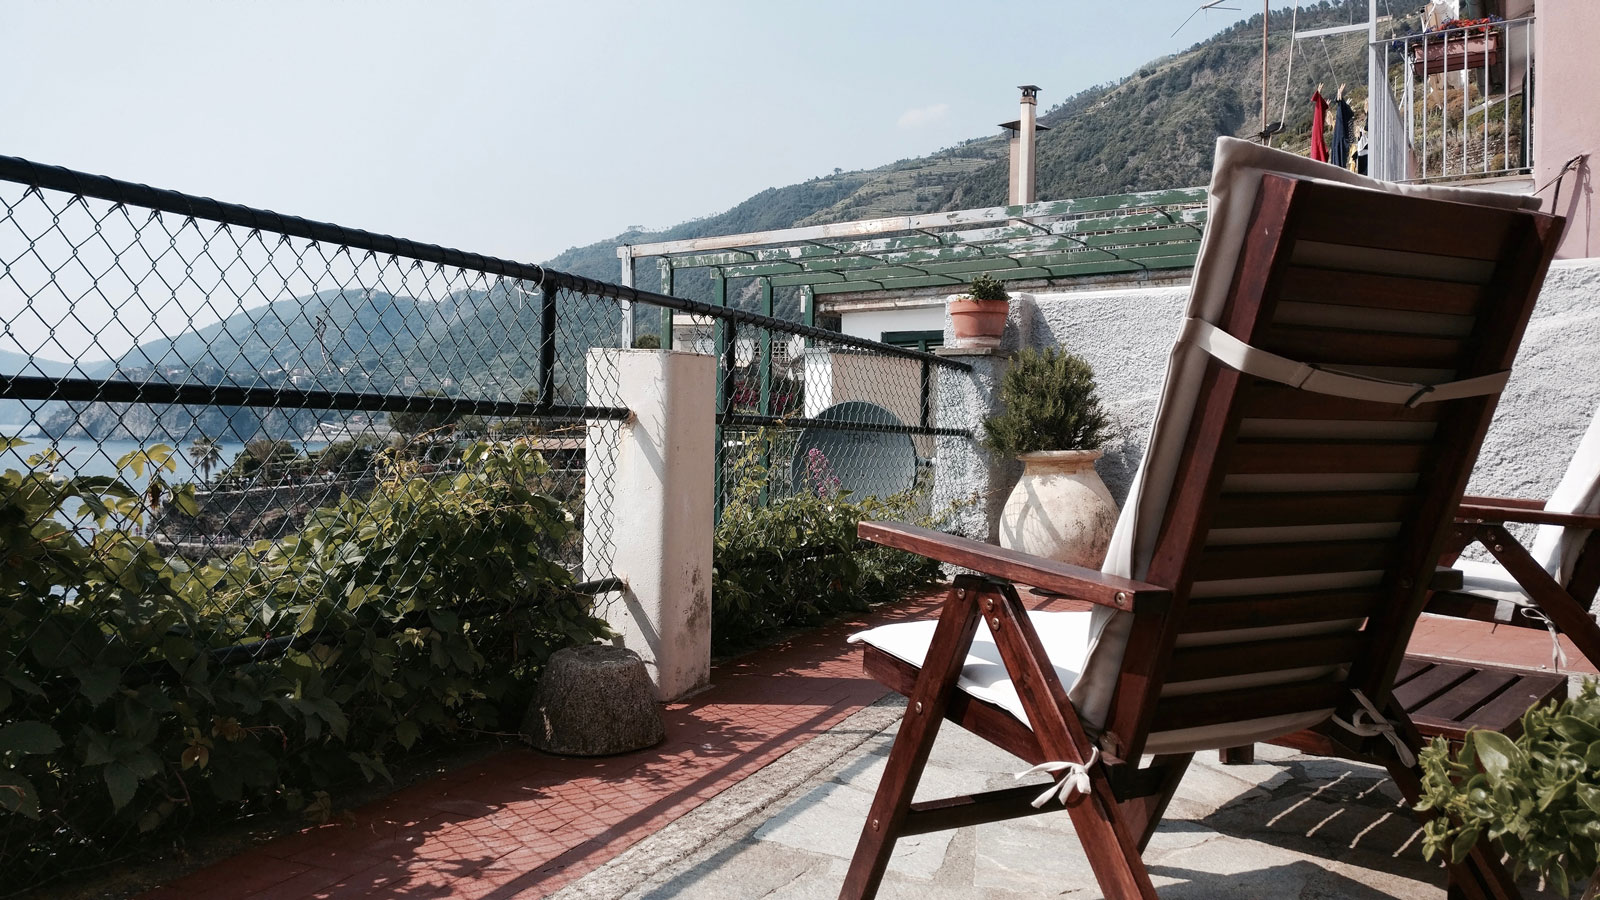 An Airbnb balcony in Italy's Cinque Terre